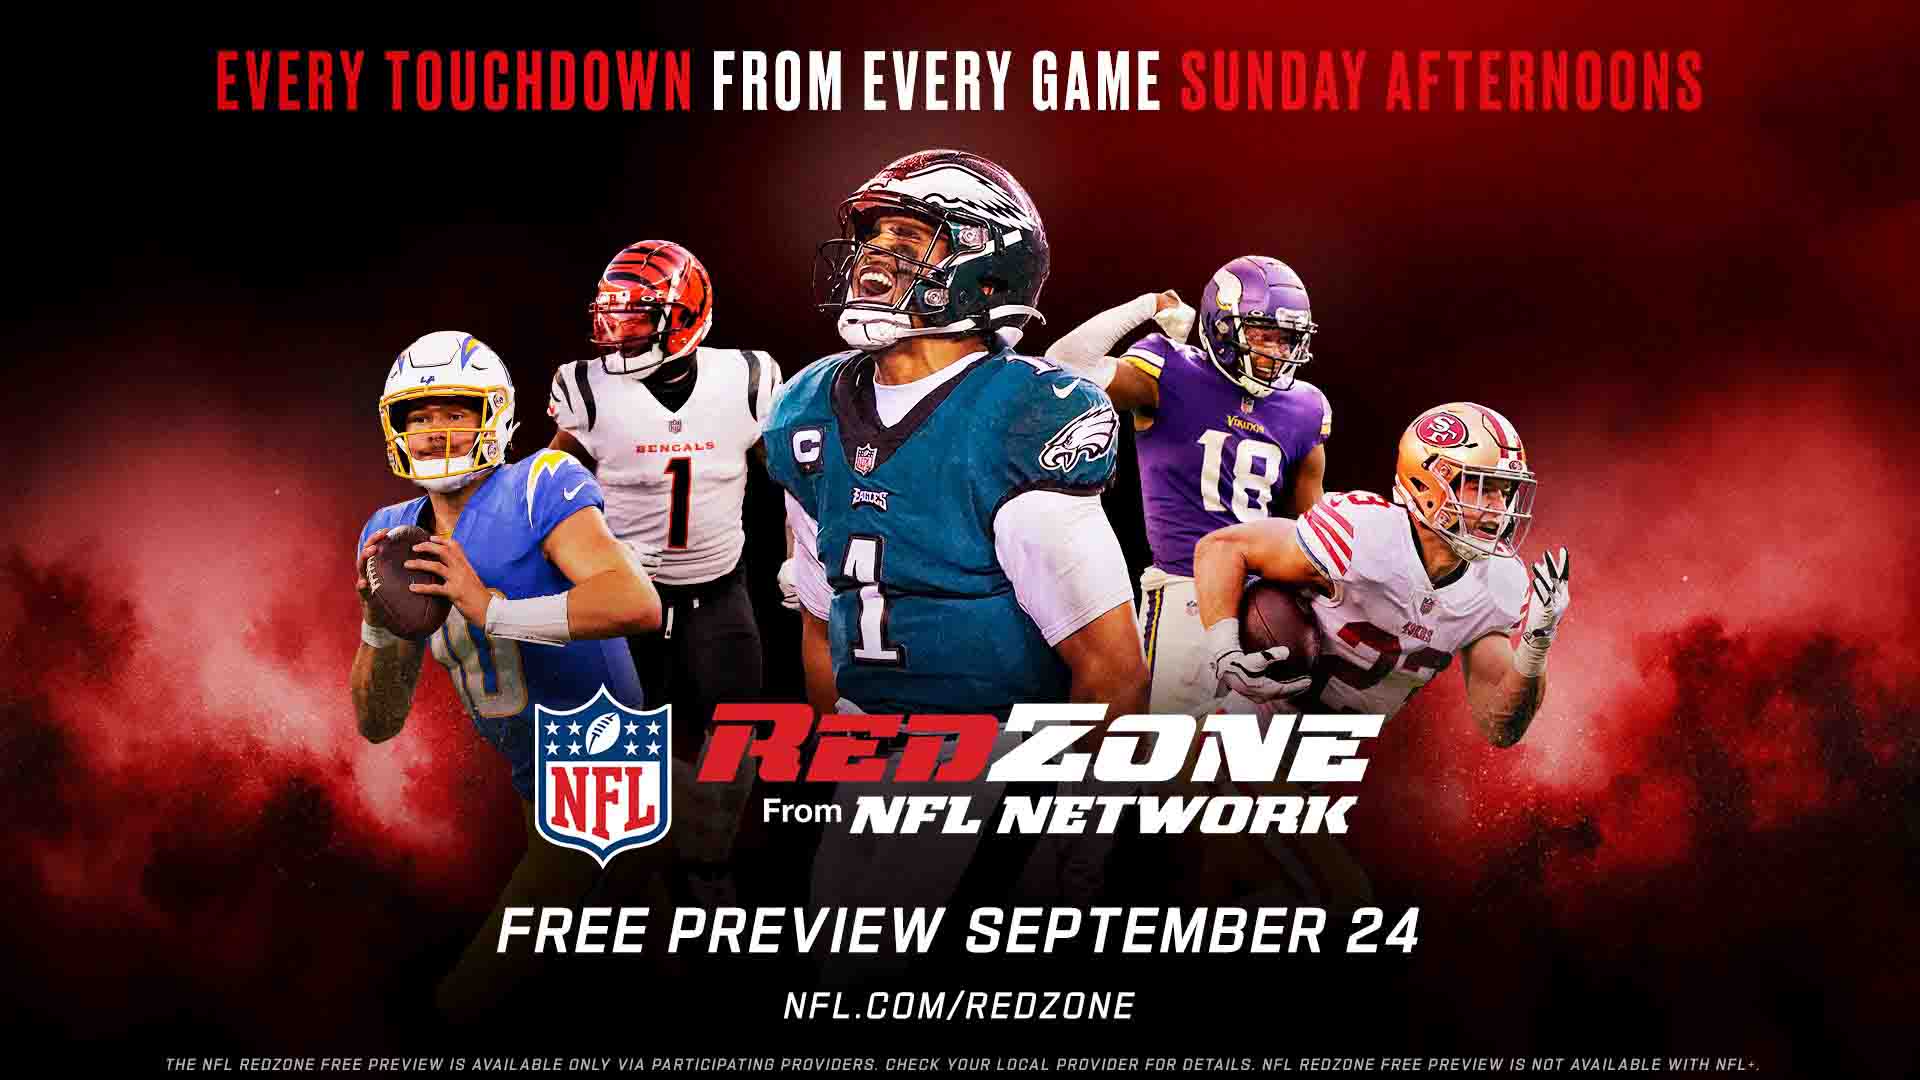 NFL Network Saturday Games Schedule, Preview, and More